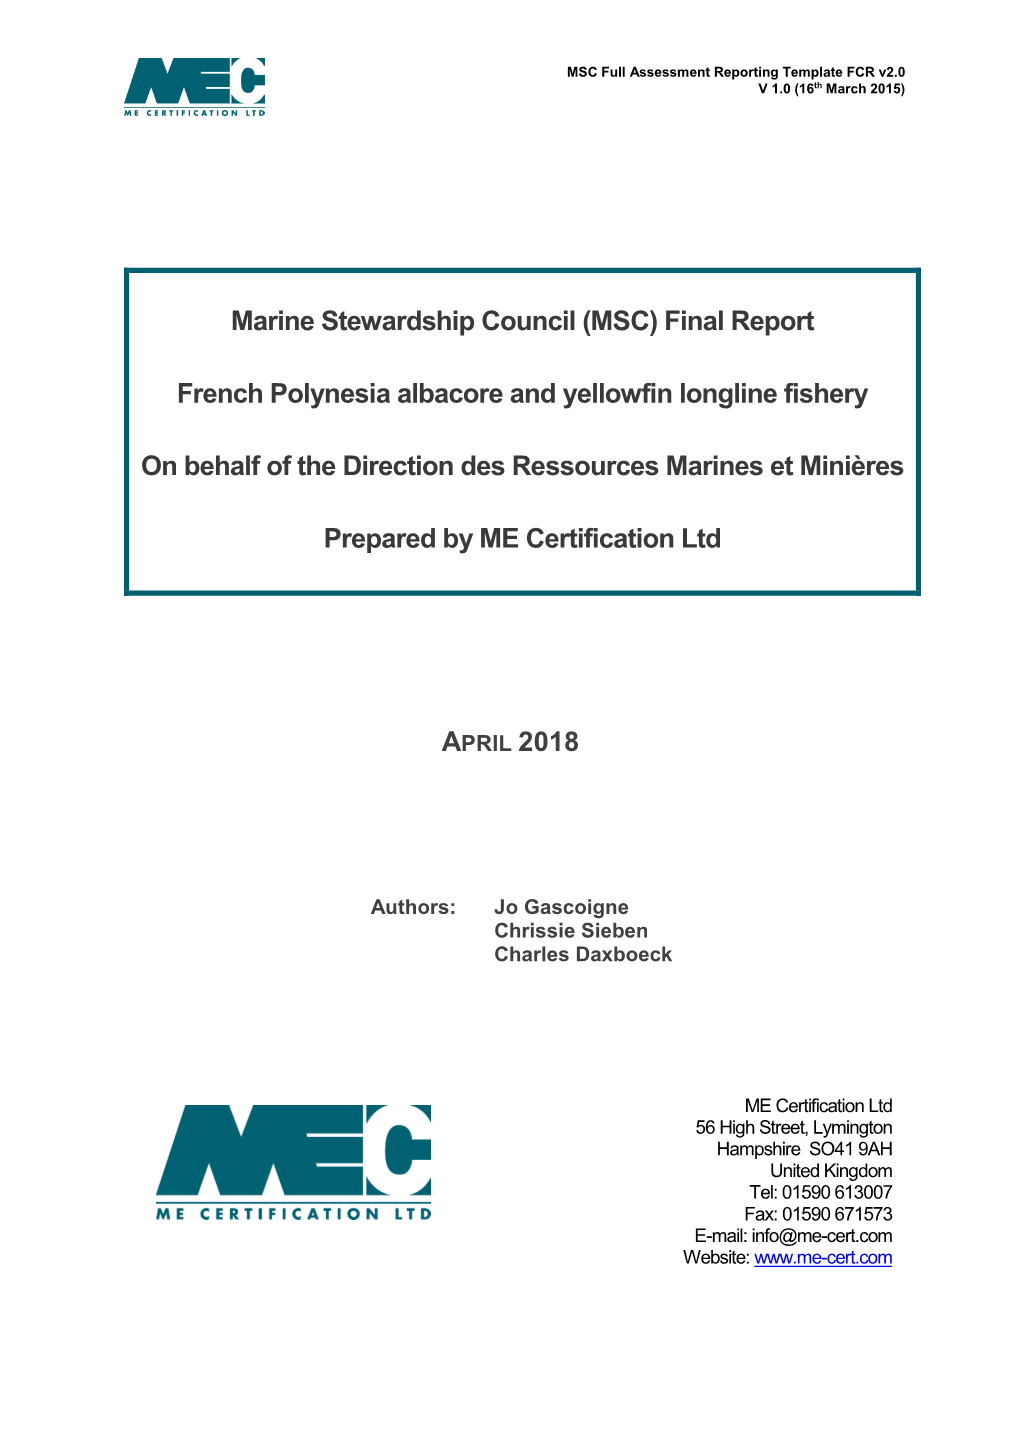 Marine Stewardship Council (MSC) Final Report French Polynesia Albacore and Yellowfin Longline Fishery on Behalf of the Directi